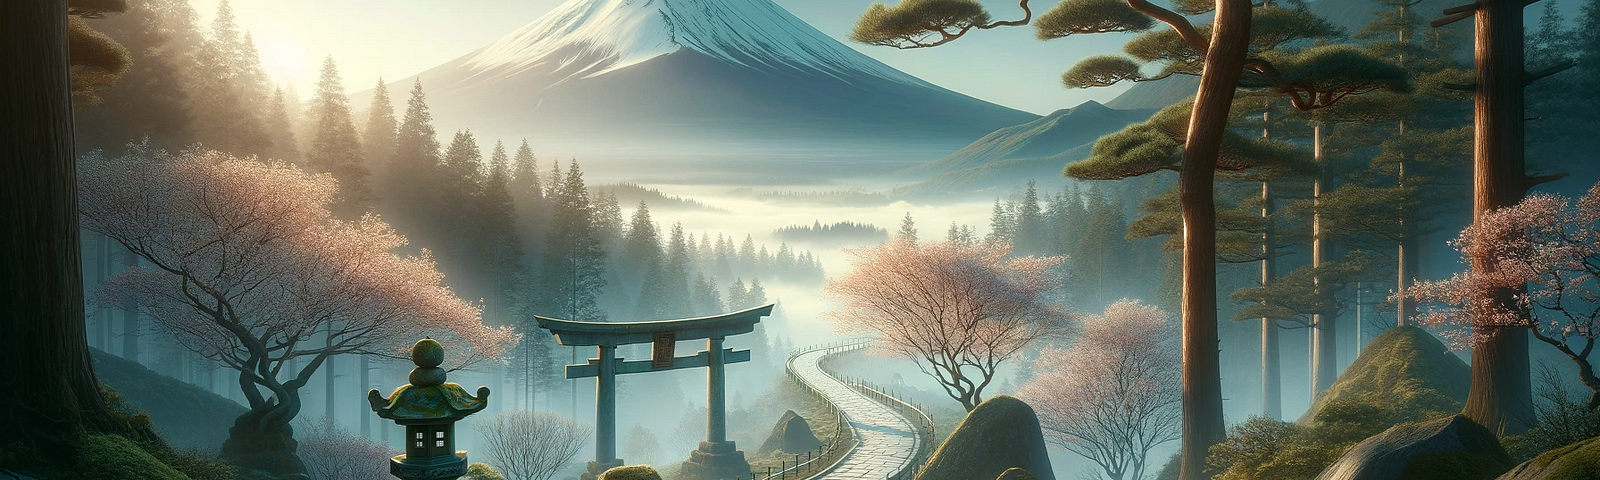 Artistic representation of a tranquil Japanese landscape, featuring a minimalist figure walking towards a traditional Torii gate amidst a serene setting with a rising sun and a calming body of water, symbolizing the path of ‘Do’ — a journey of discipline, practice, and self-reflection in the pursuit of mastery and inner peace